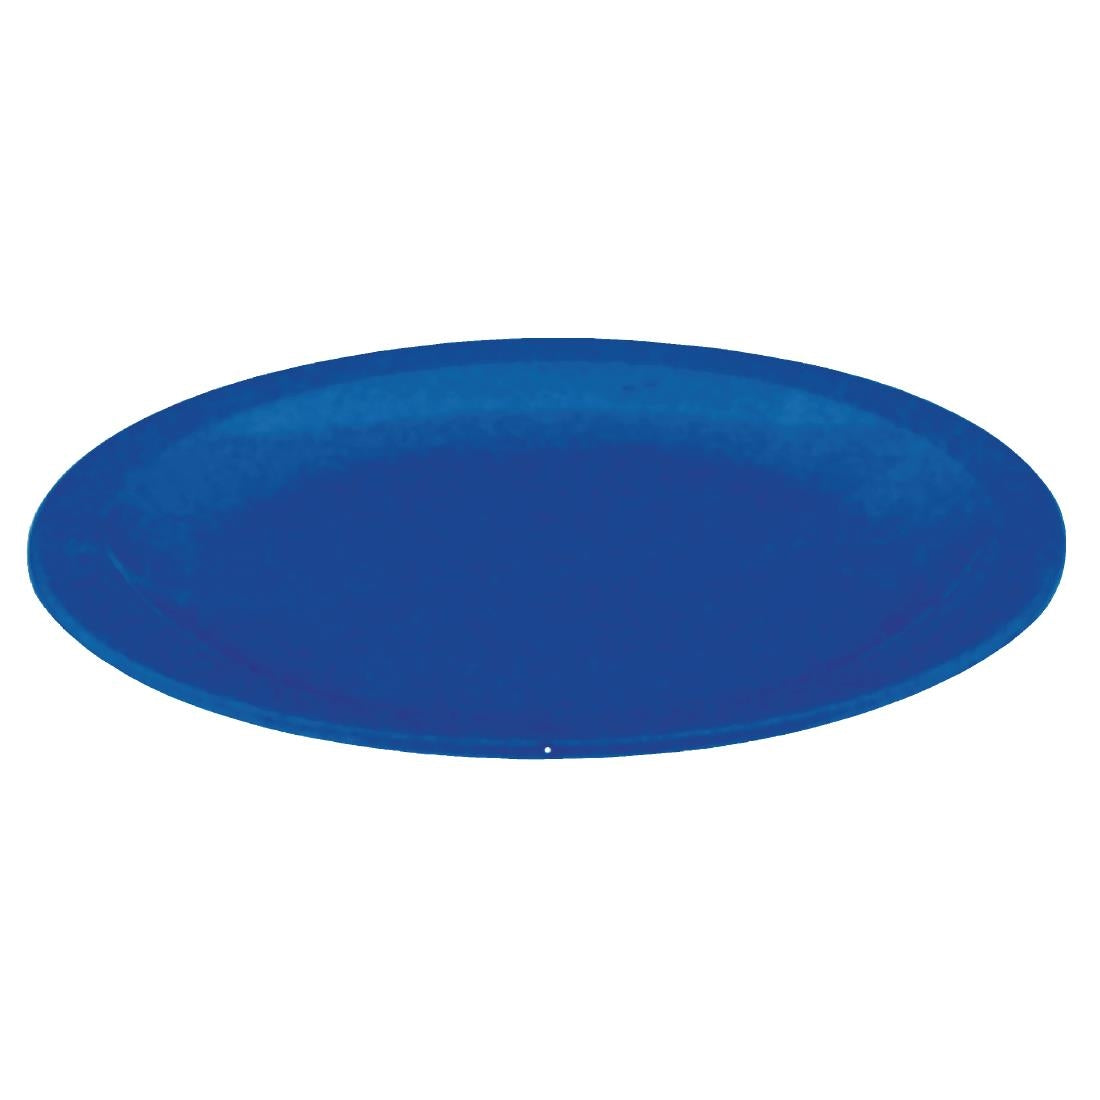 Kristallon Polycarbonate Plates (Pack of 12) JD Catering Equipment Solutions Ltd